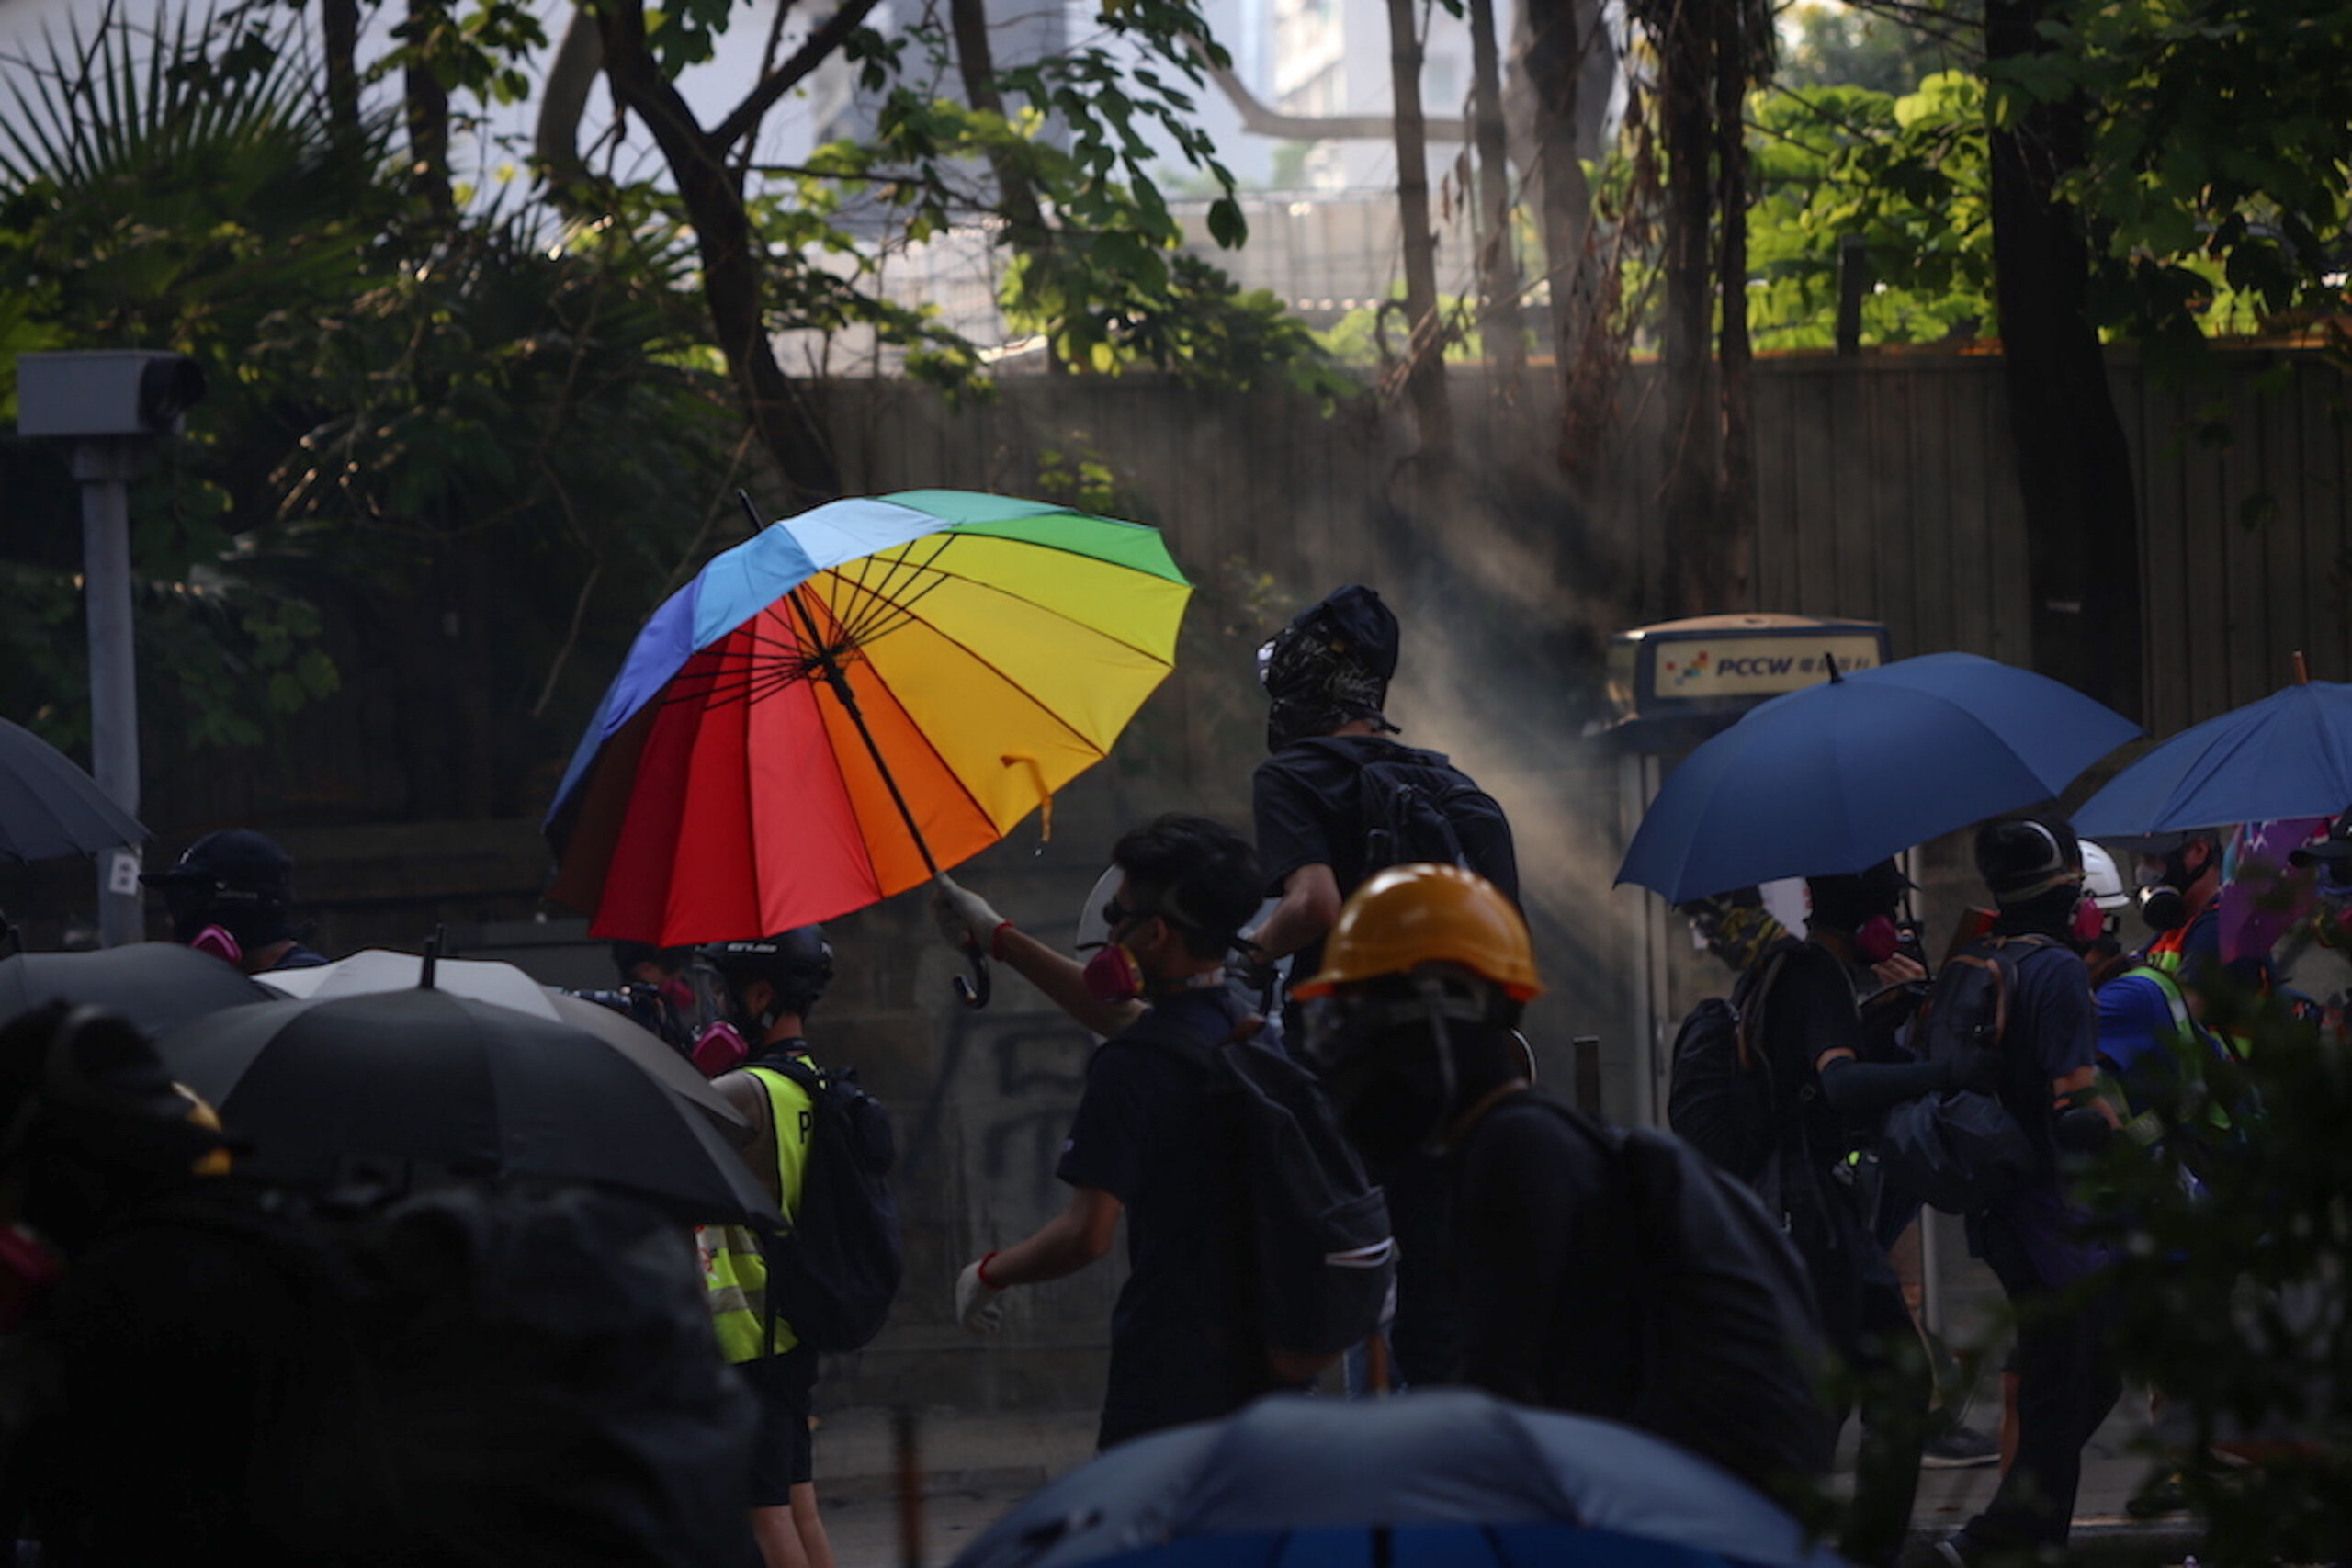 A protester clad in all-black clothing uses a bright rainbow umbrella as a shield against tear gas and surveillance by police.